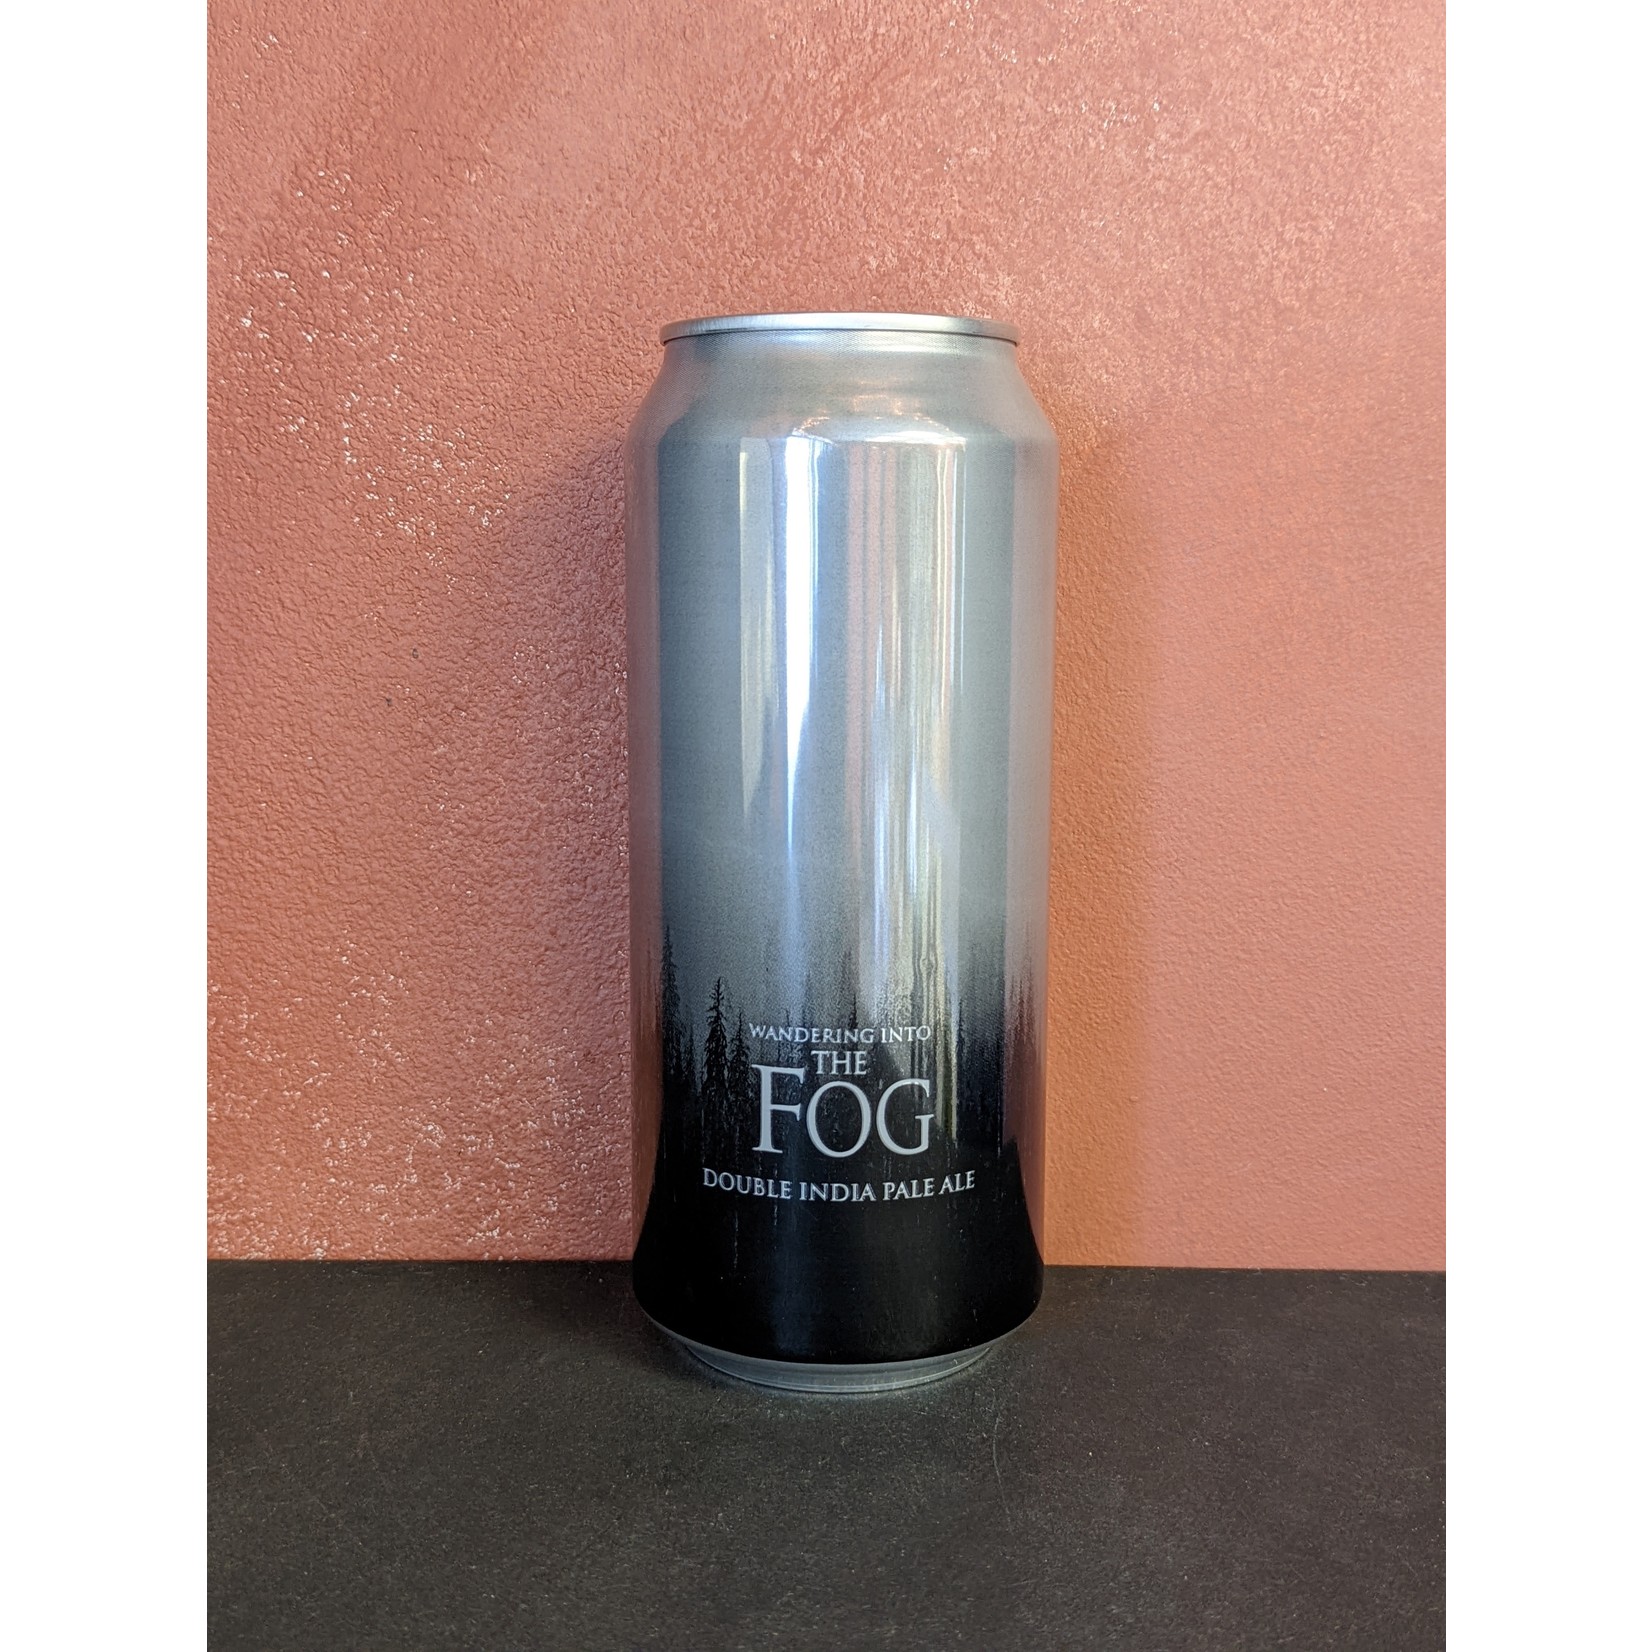 Abomination "Wandering Into The Fog" DIPA CAN